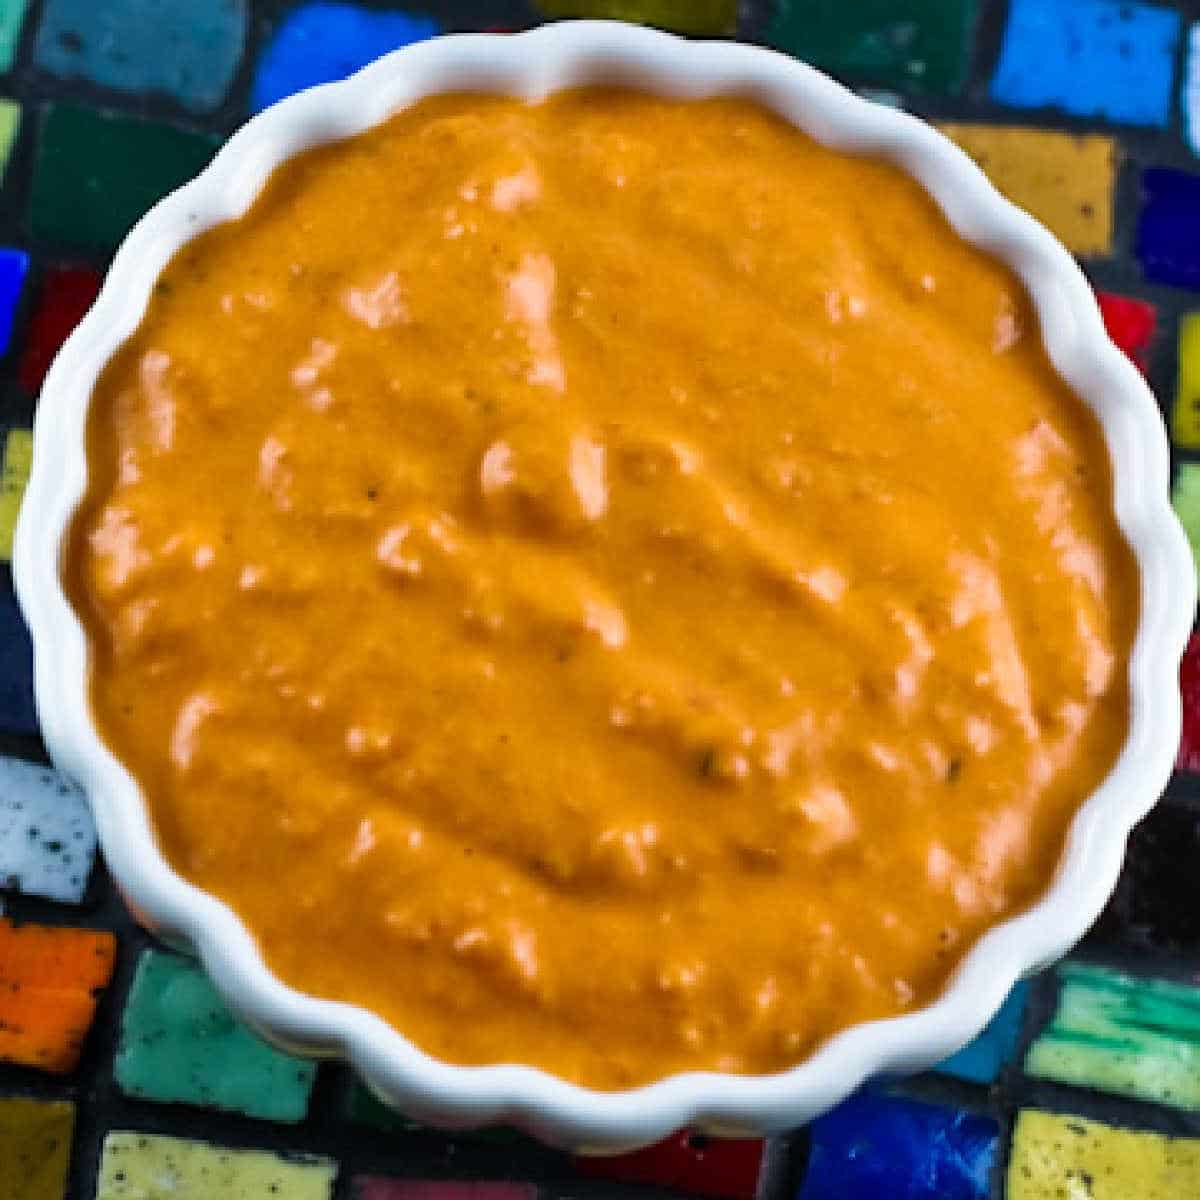 Square image of roasted red pepper sauce shown in a bowl on tiles